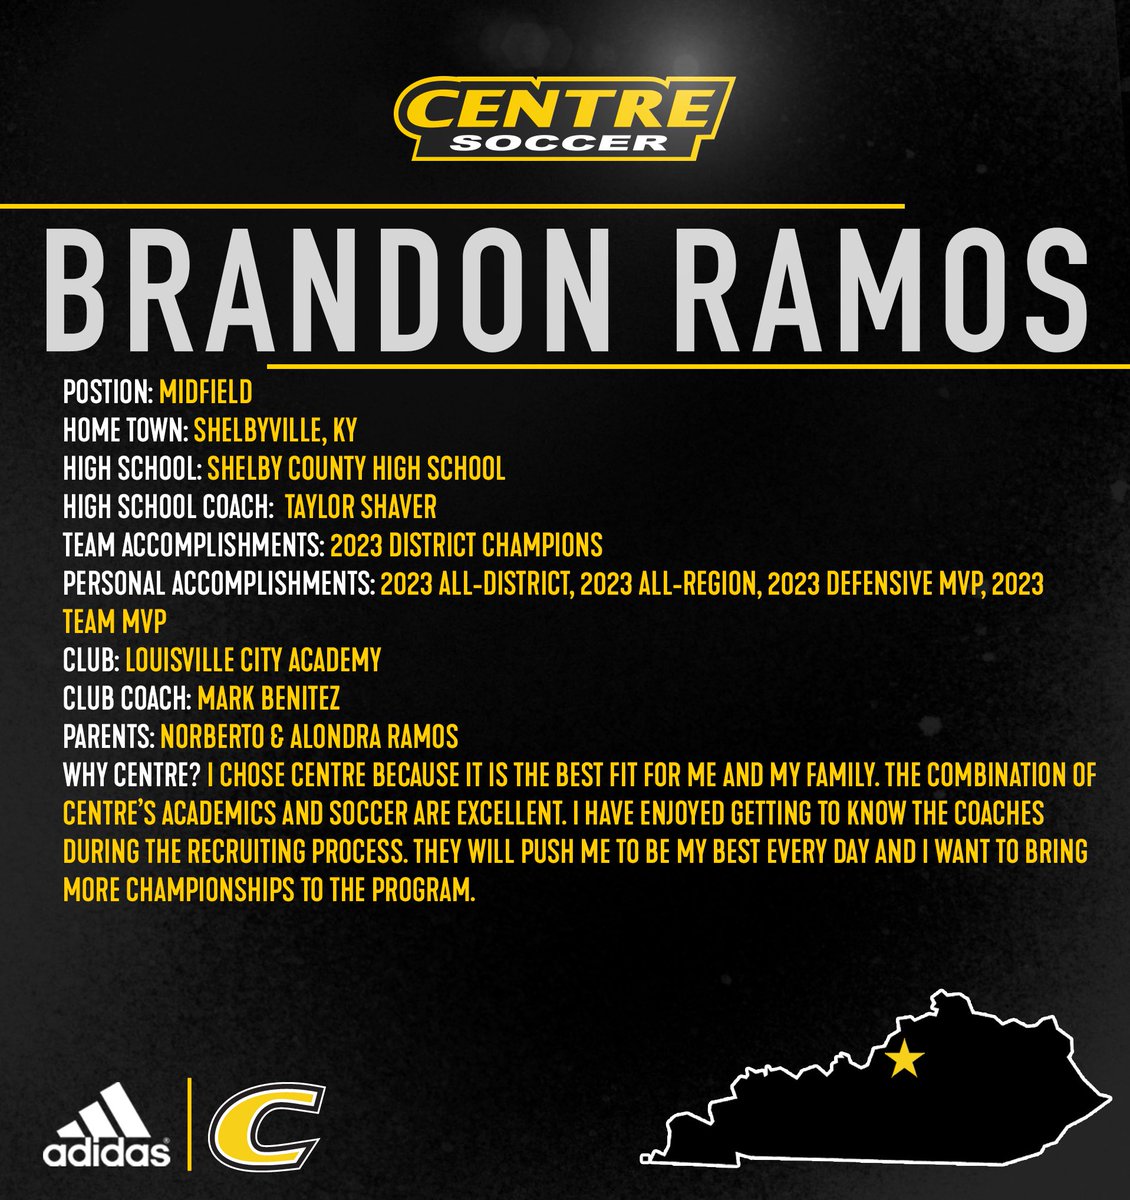 Please join us in Welcoming Brandon Ramos to our #CentreSoccer Family! @LouCityAcademy